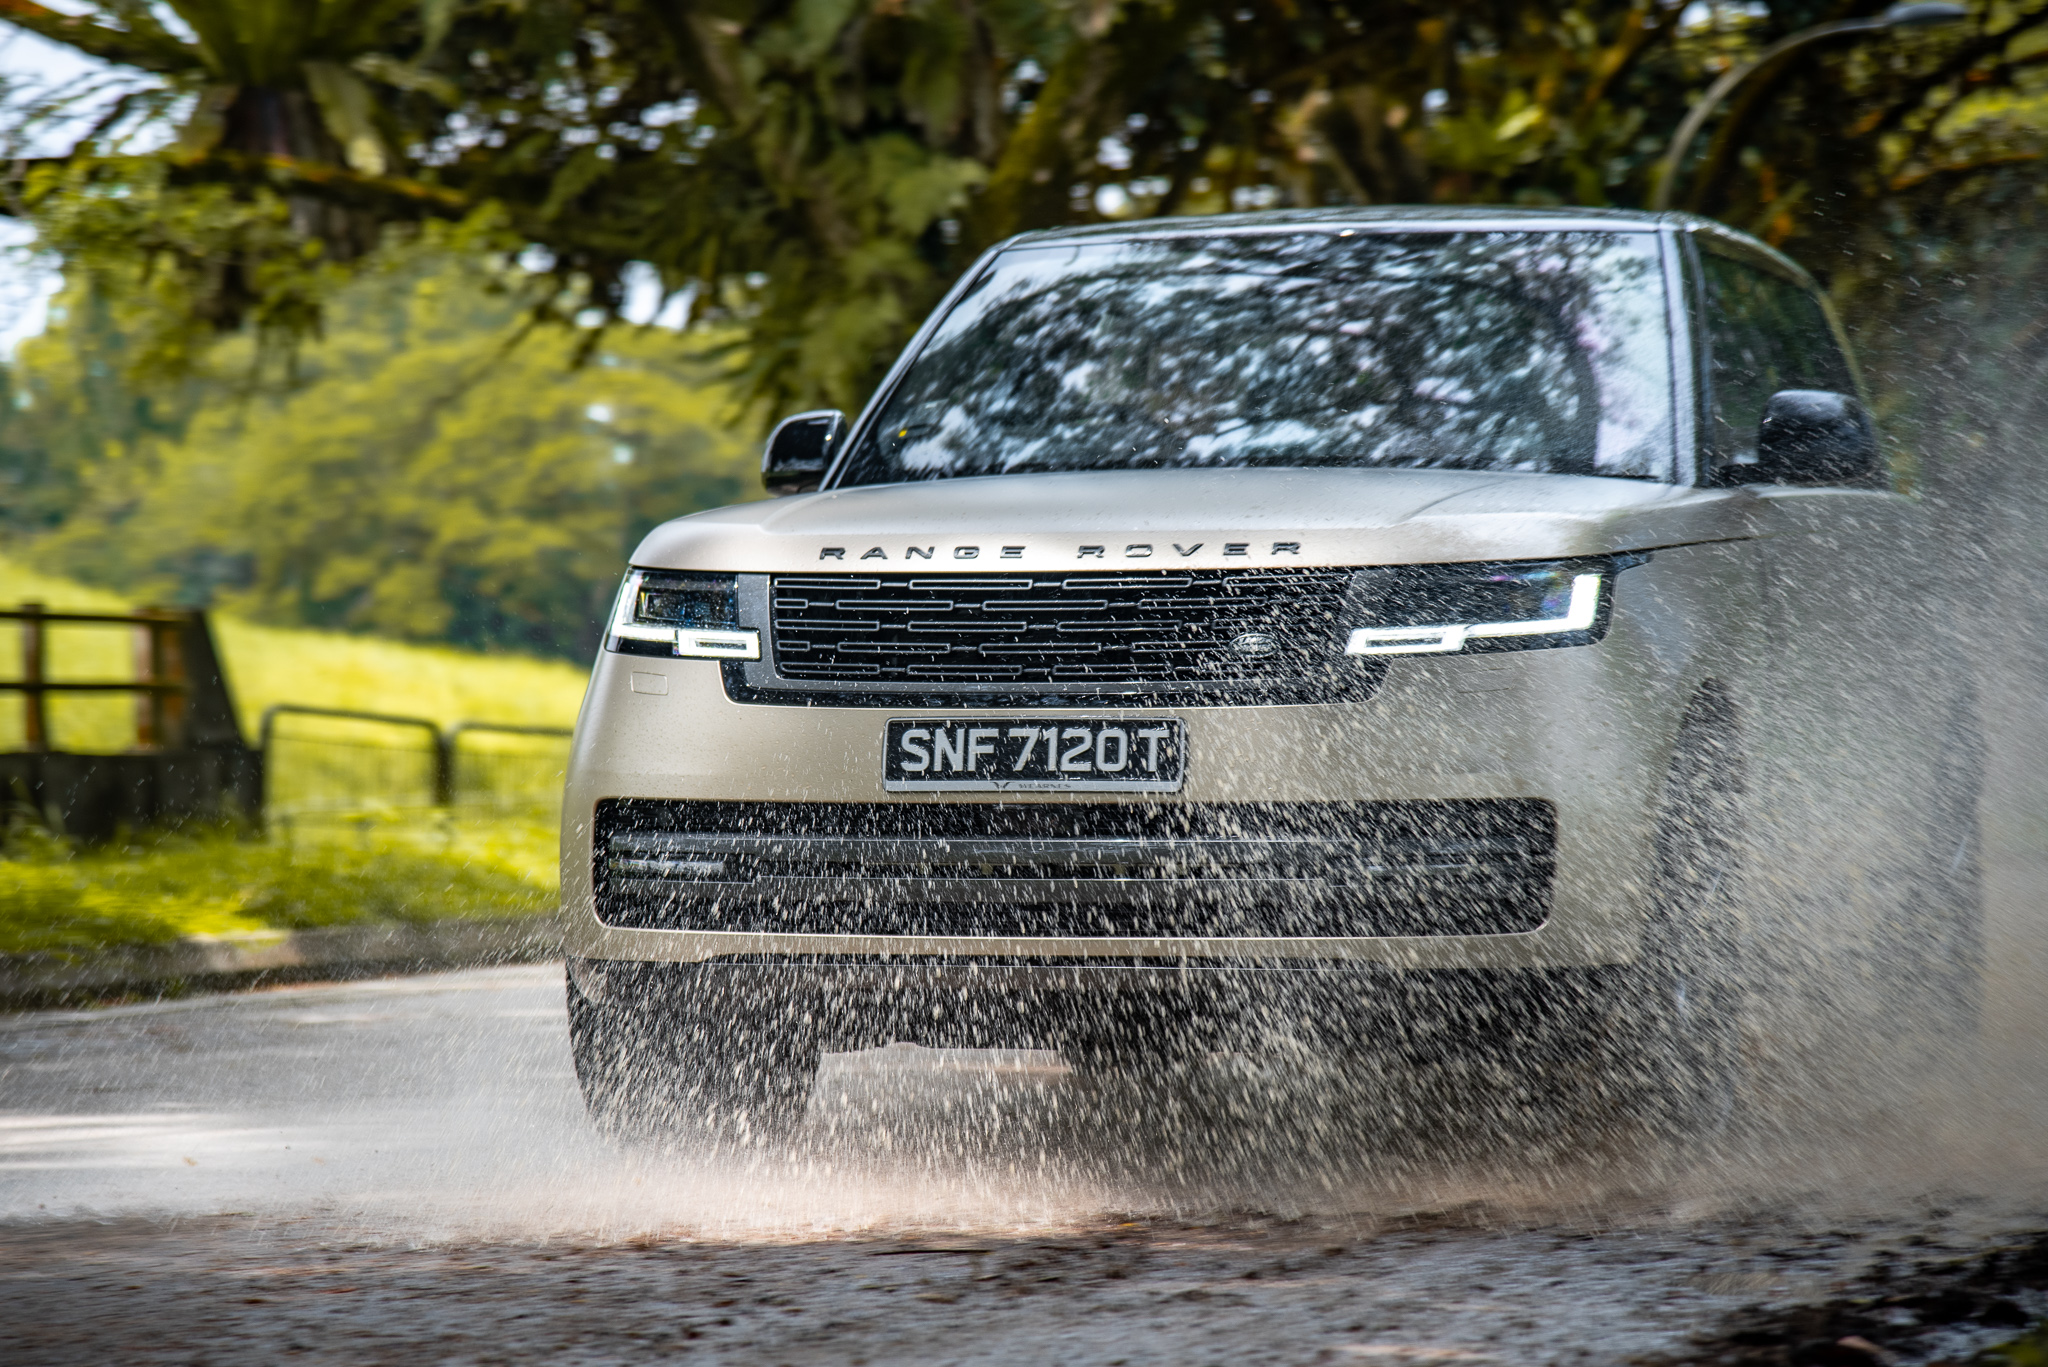 The Range Rover is one of the few luxury vehicles that manages to look as good both spotless and stained! 